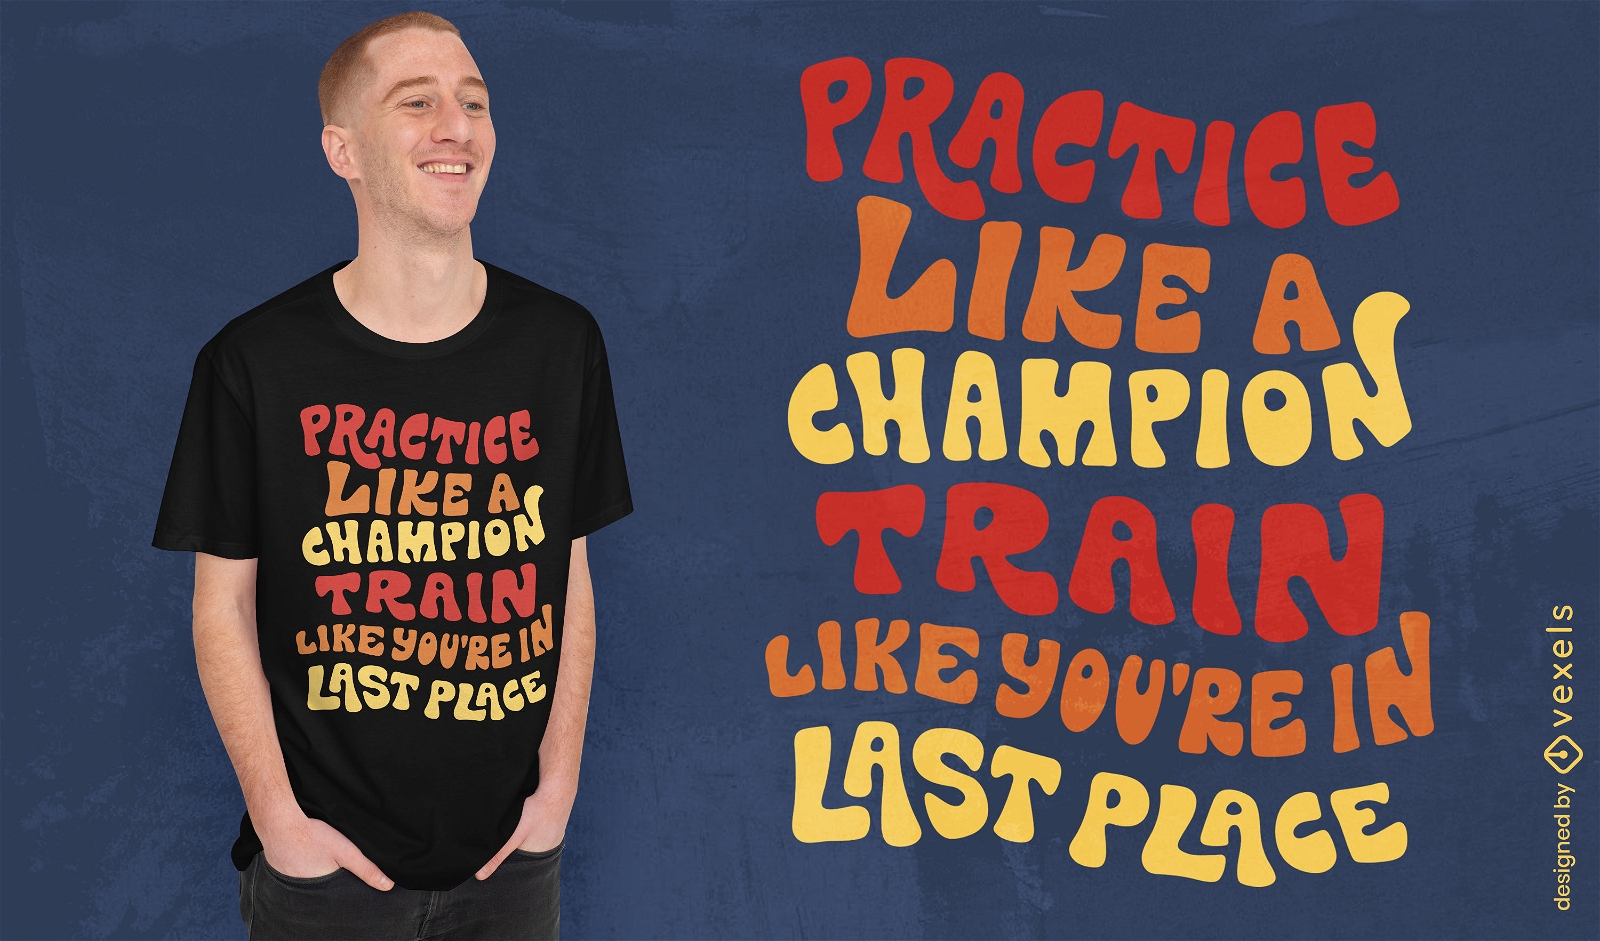 Practice and train quote t-shirt design